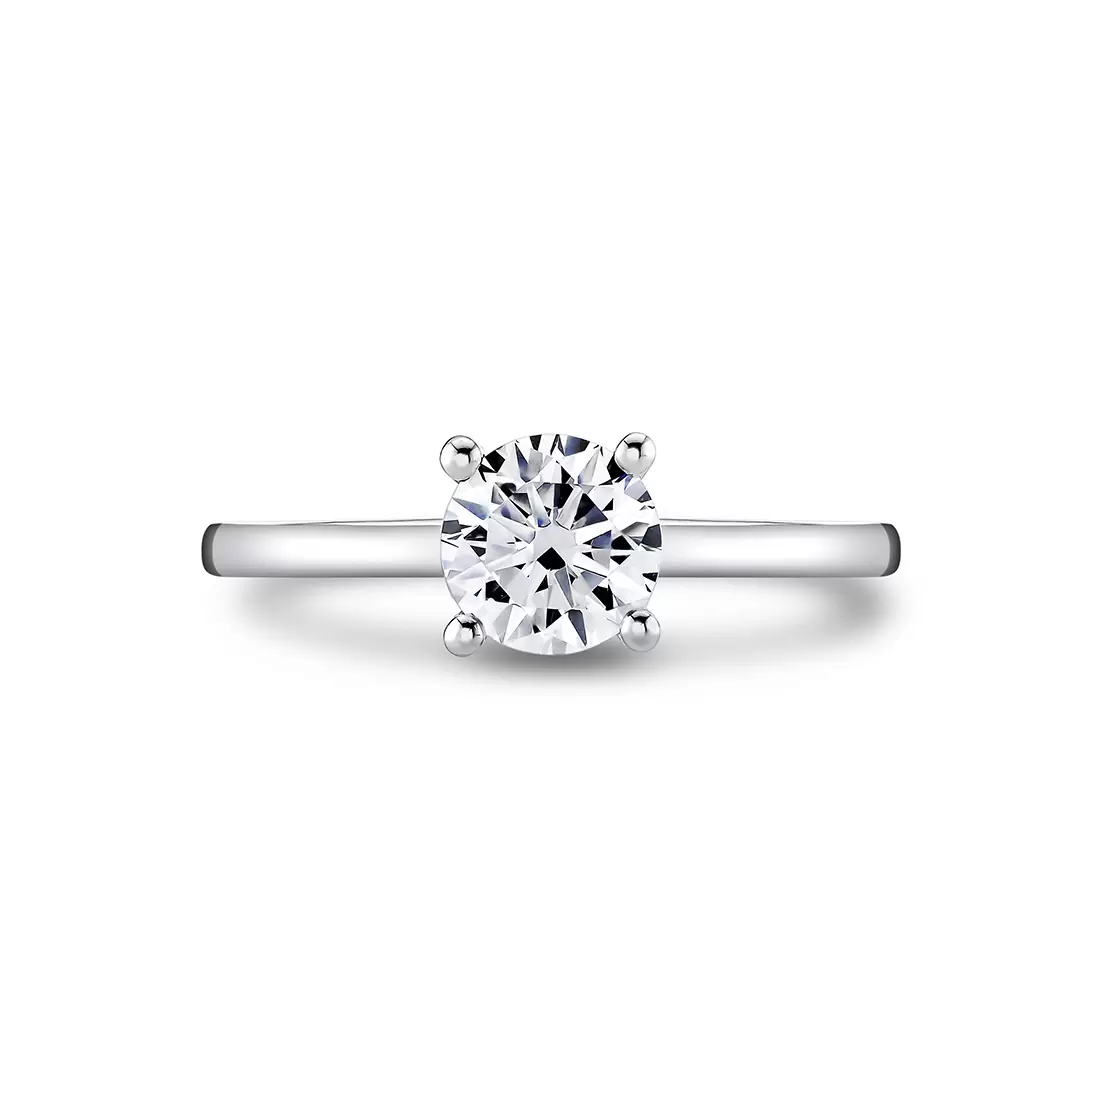 Iconelle solitaire two tone engagement ring